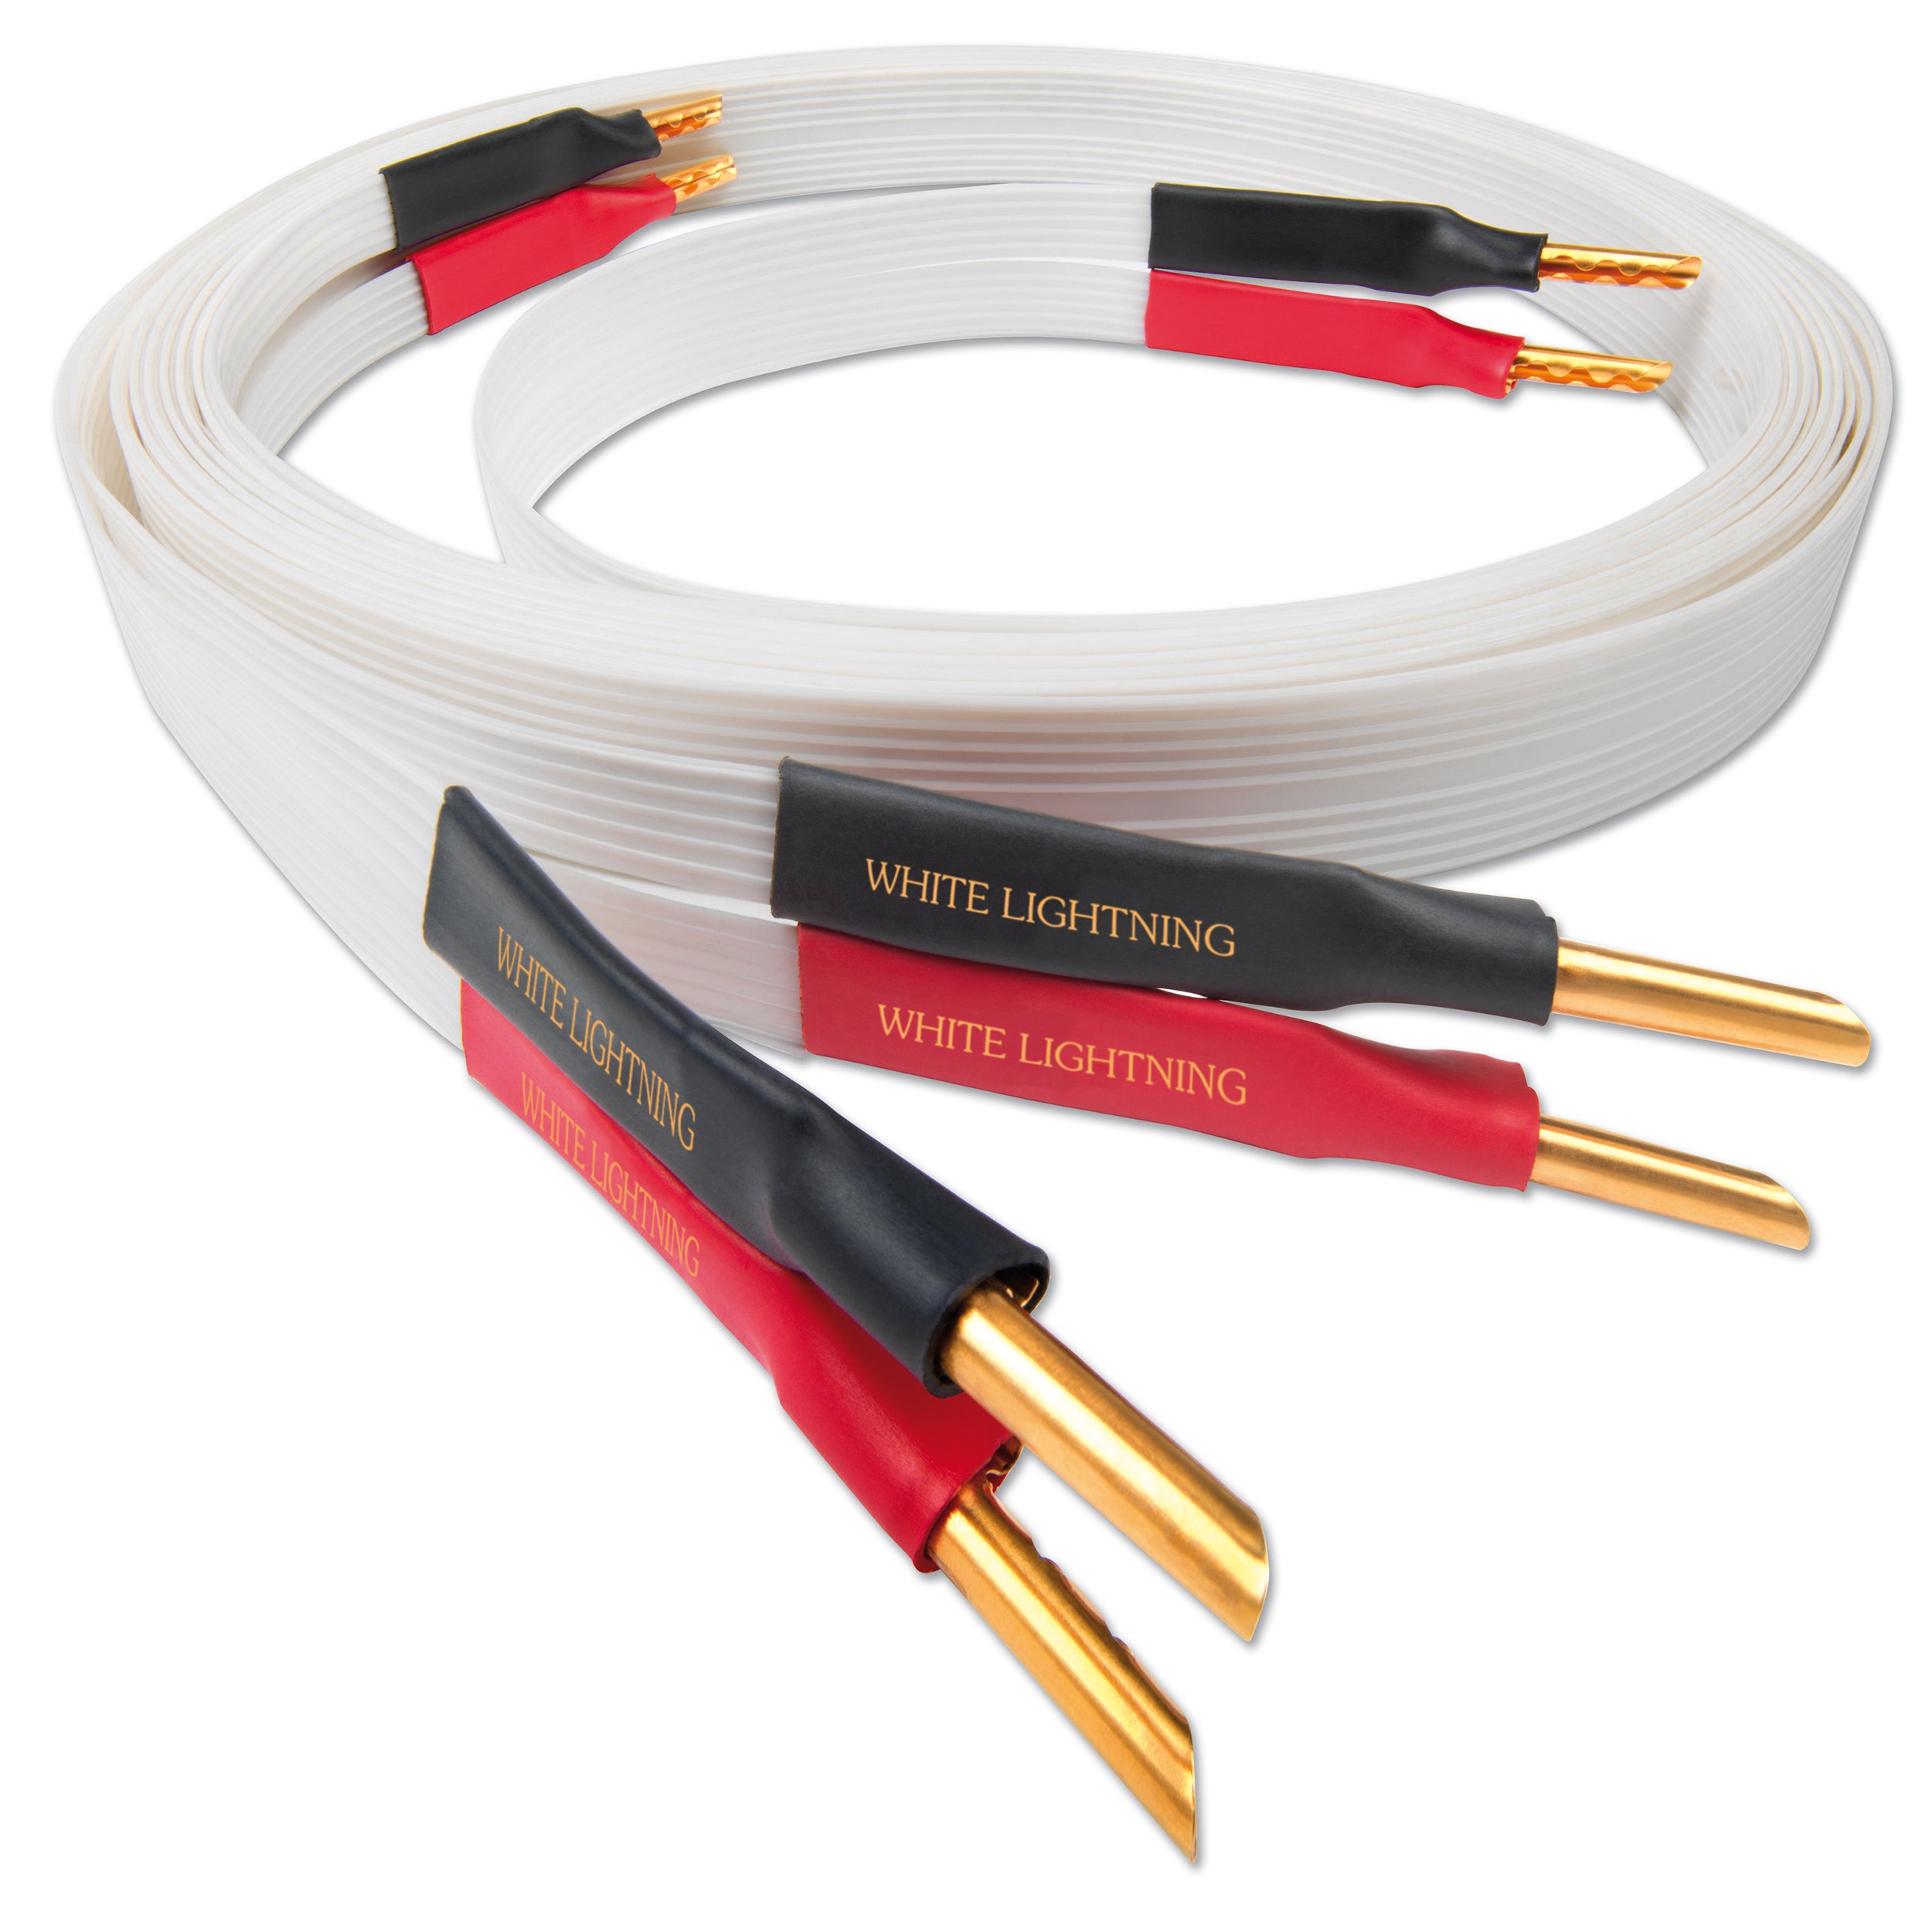 Nordost White Lightning Speaker Cable - Sold as a Pair